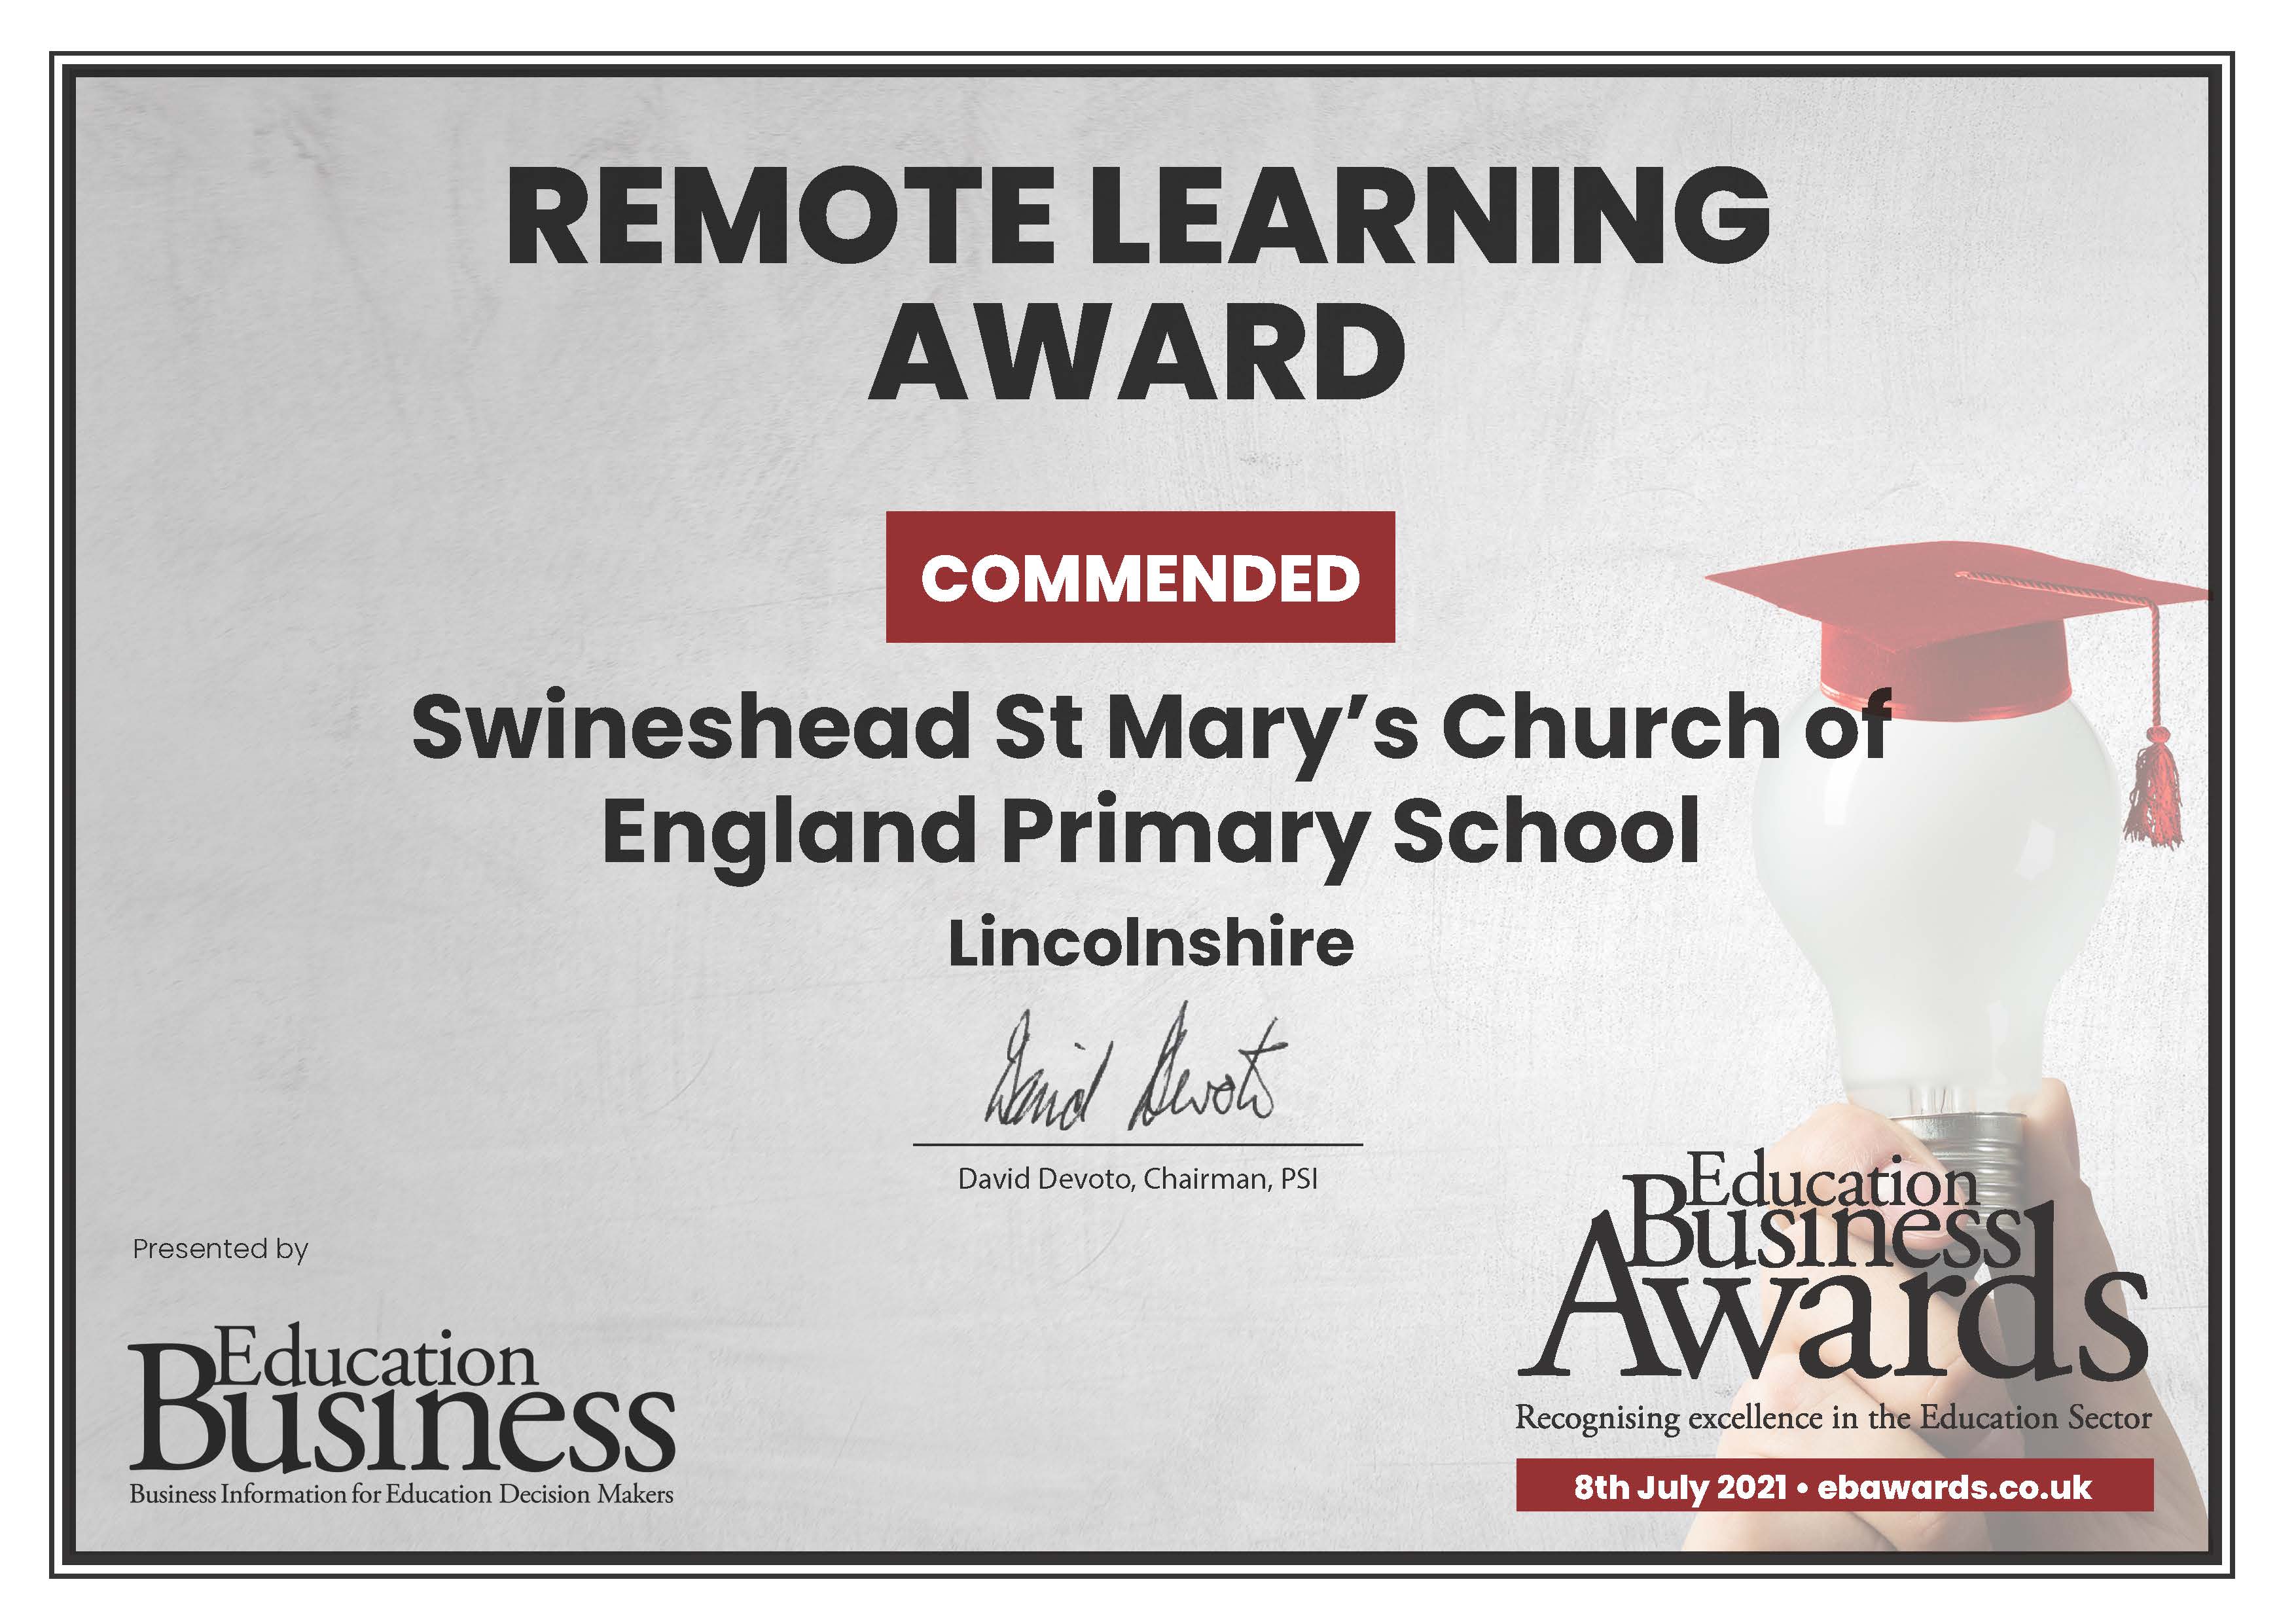 Remote Learning Award - Commended